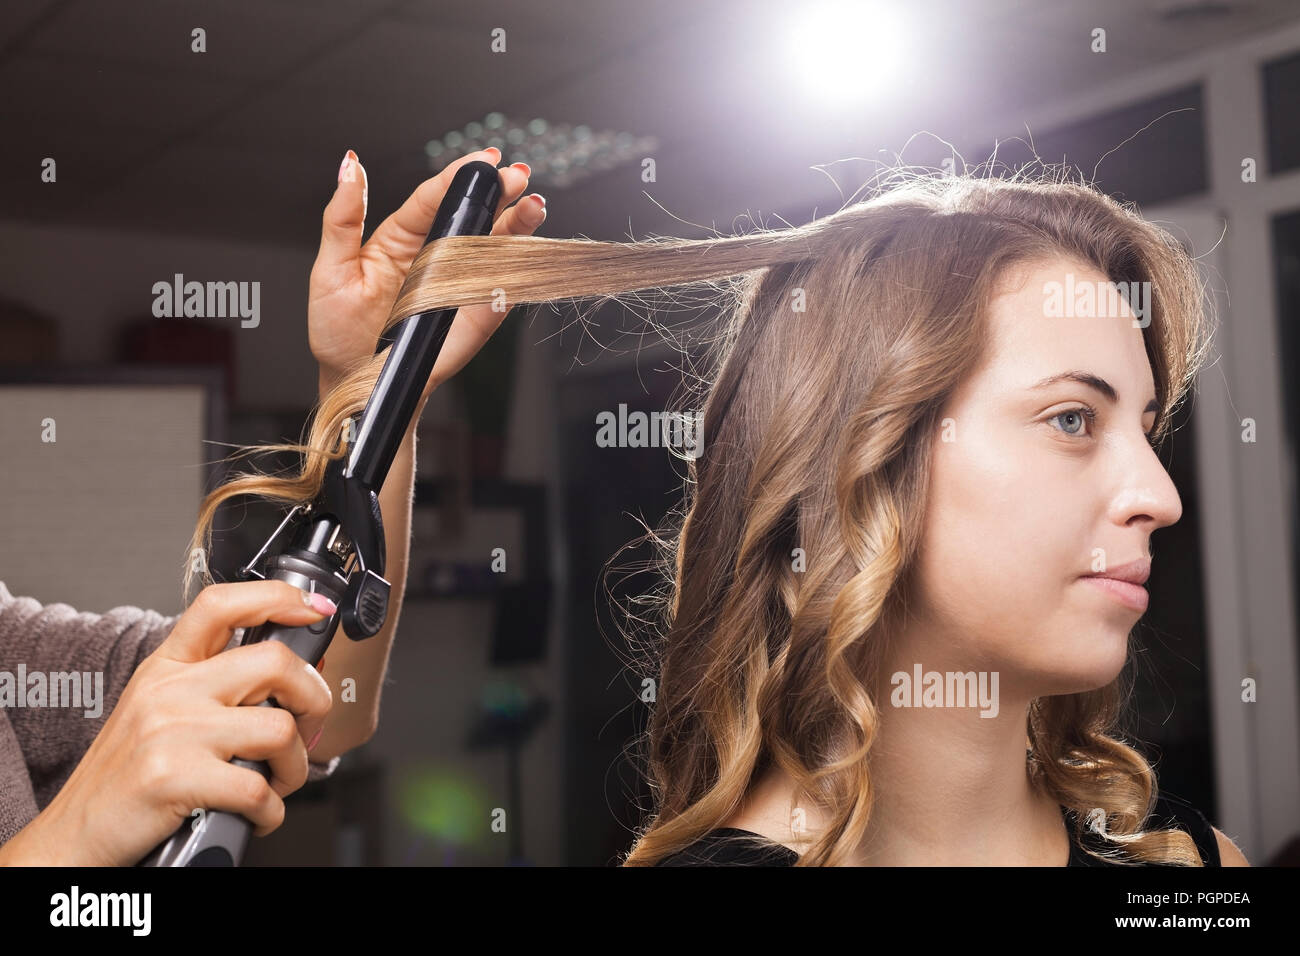 hairdresser carefully making hair curling to a client Stock Photo